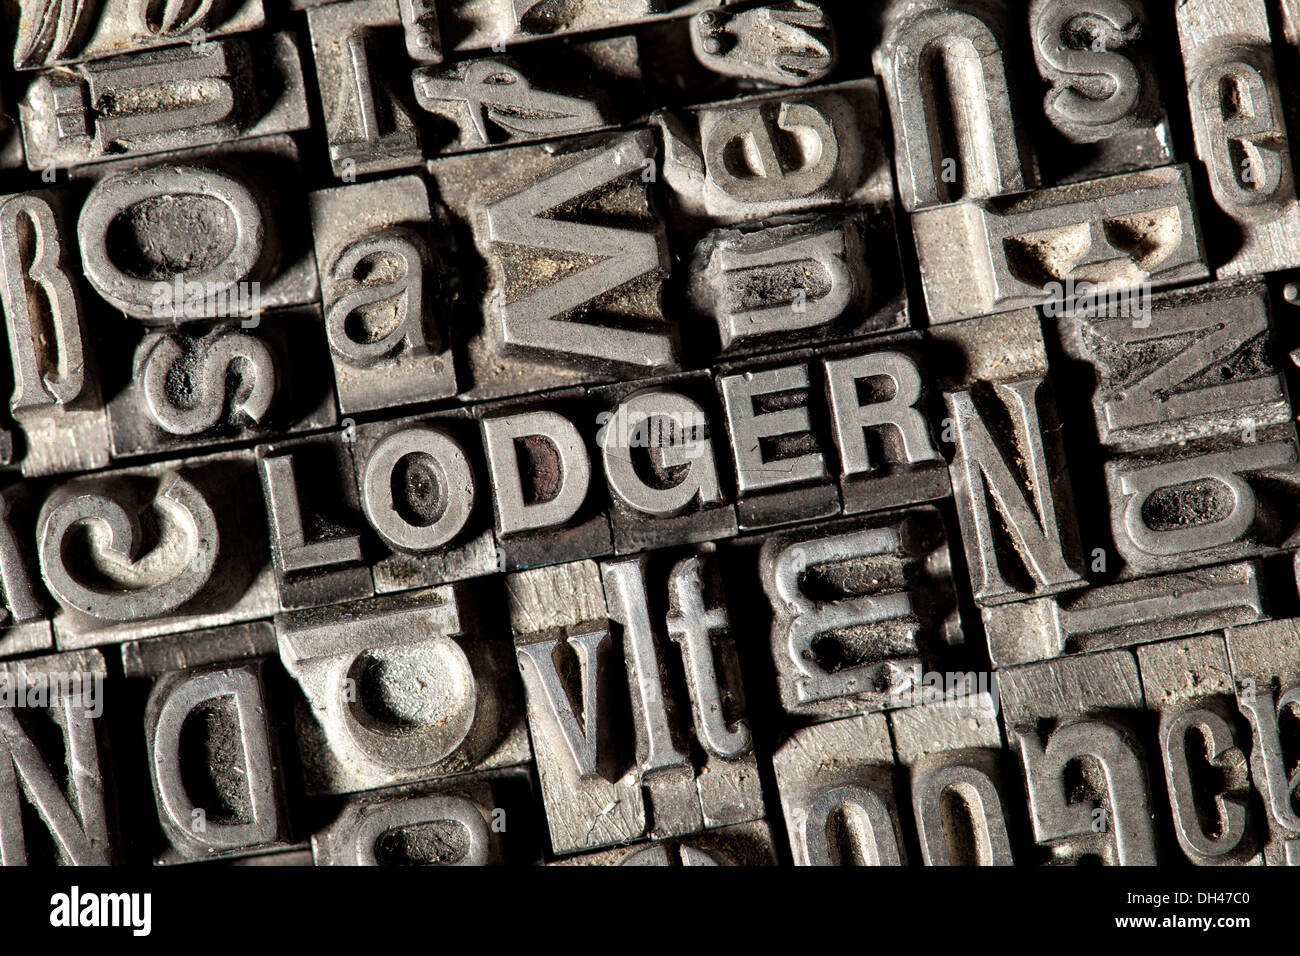 Old lead letters forming the word &quot;LODGER&quot; Stock Photo